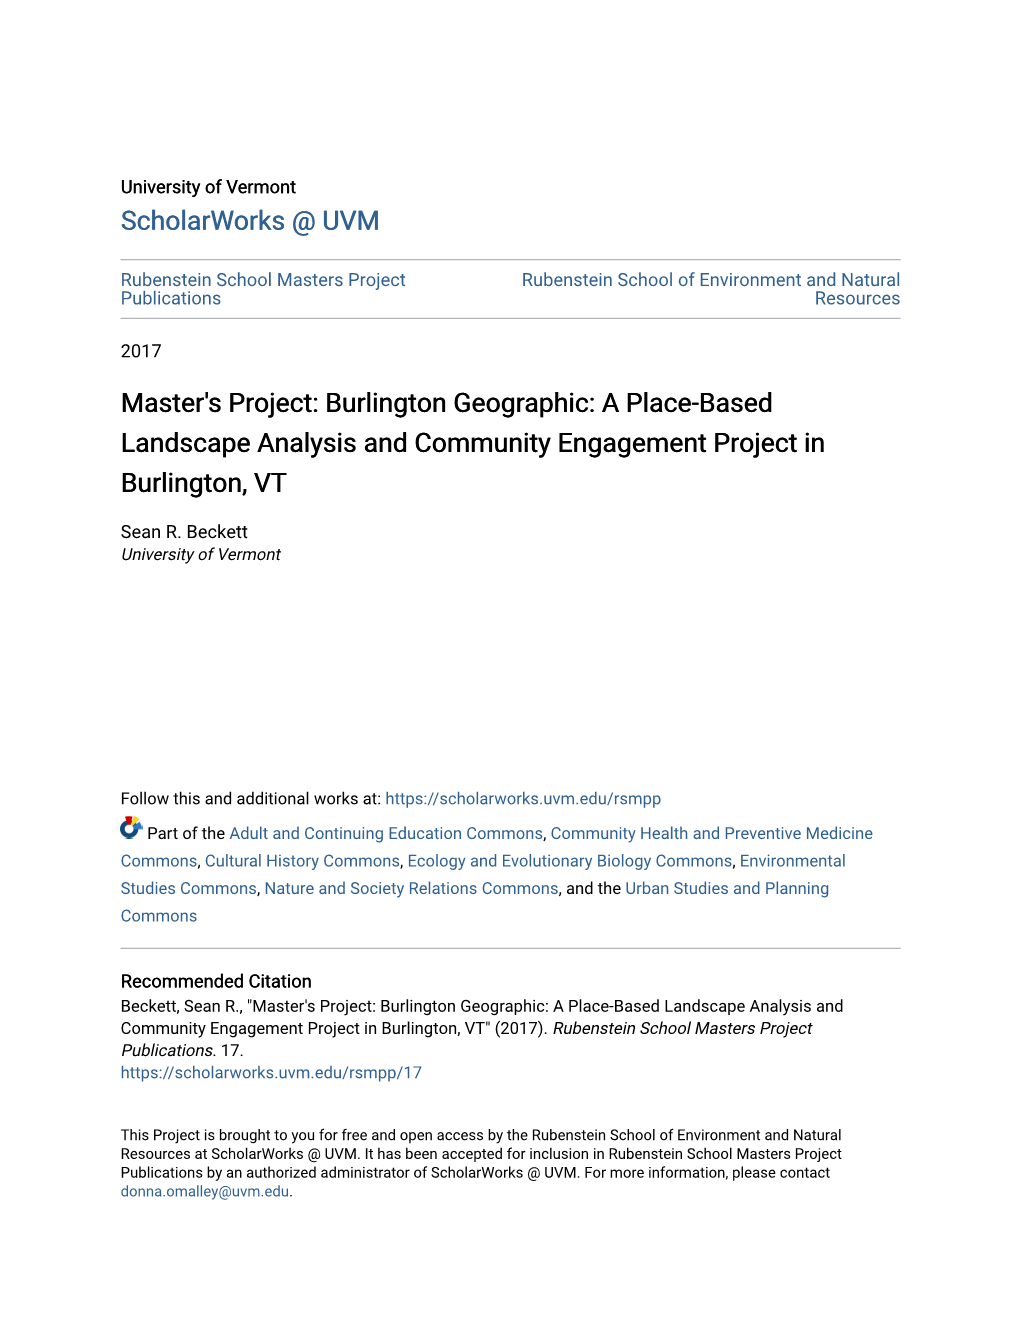 A Place-Based Landscape Analysis and Community Engagement Project in Burlington, VT